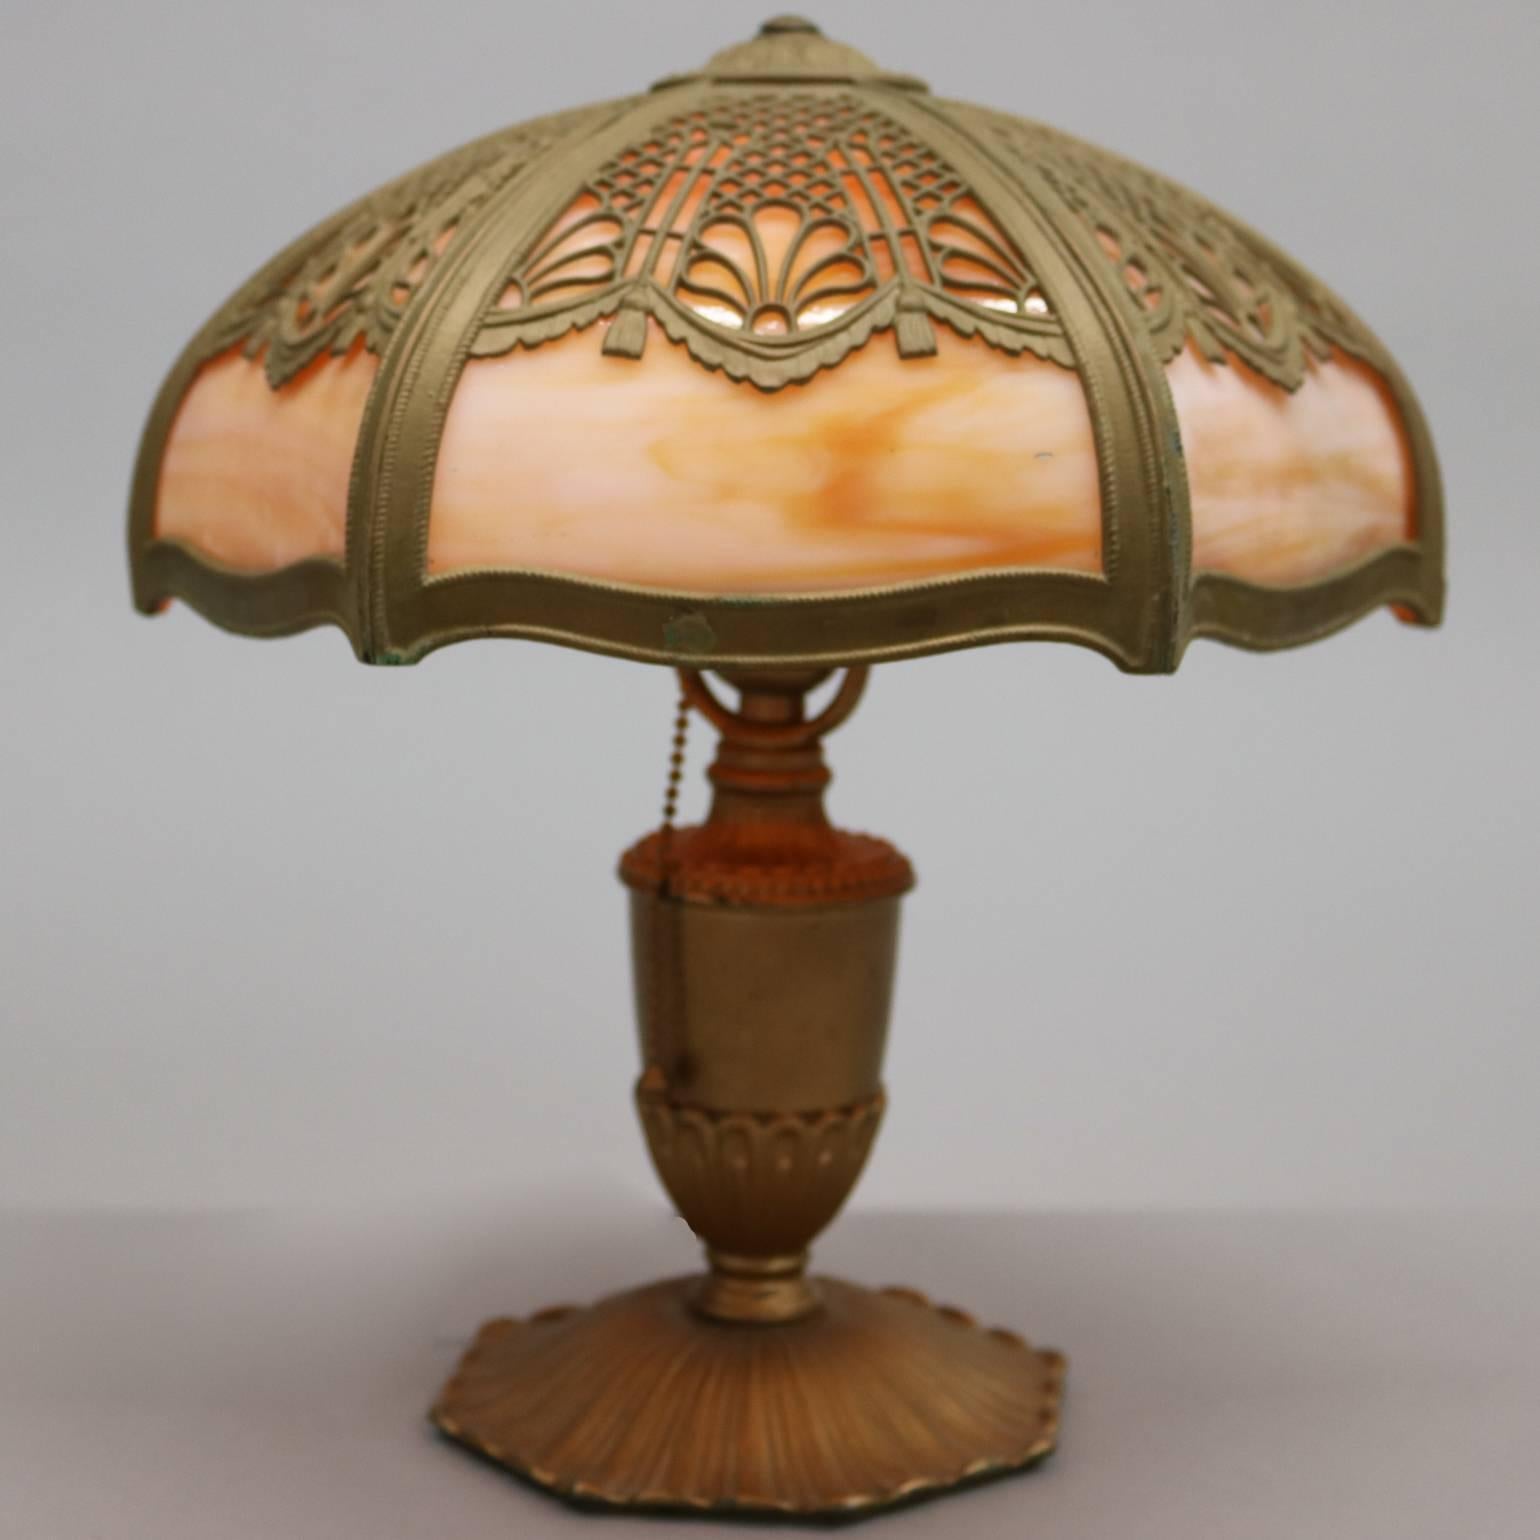 Antique Arts & Crafts junior size slag glass lamp by Miller & Co. features six panel filigree overlay shade with bronzed urn form base, E.M. & Co. and 1911 on base, early 20th century.

Measures: 13.5" H x 11.5" diam.